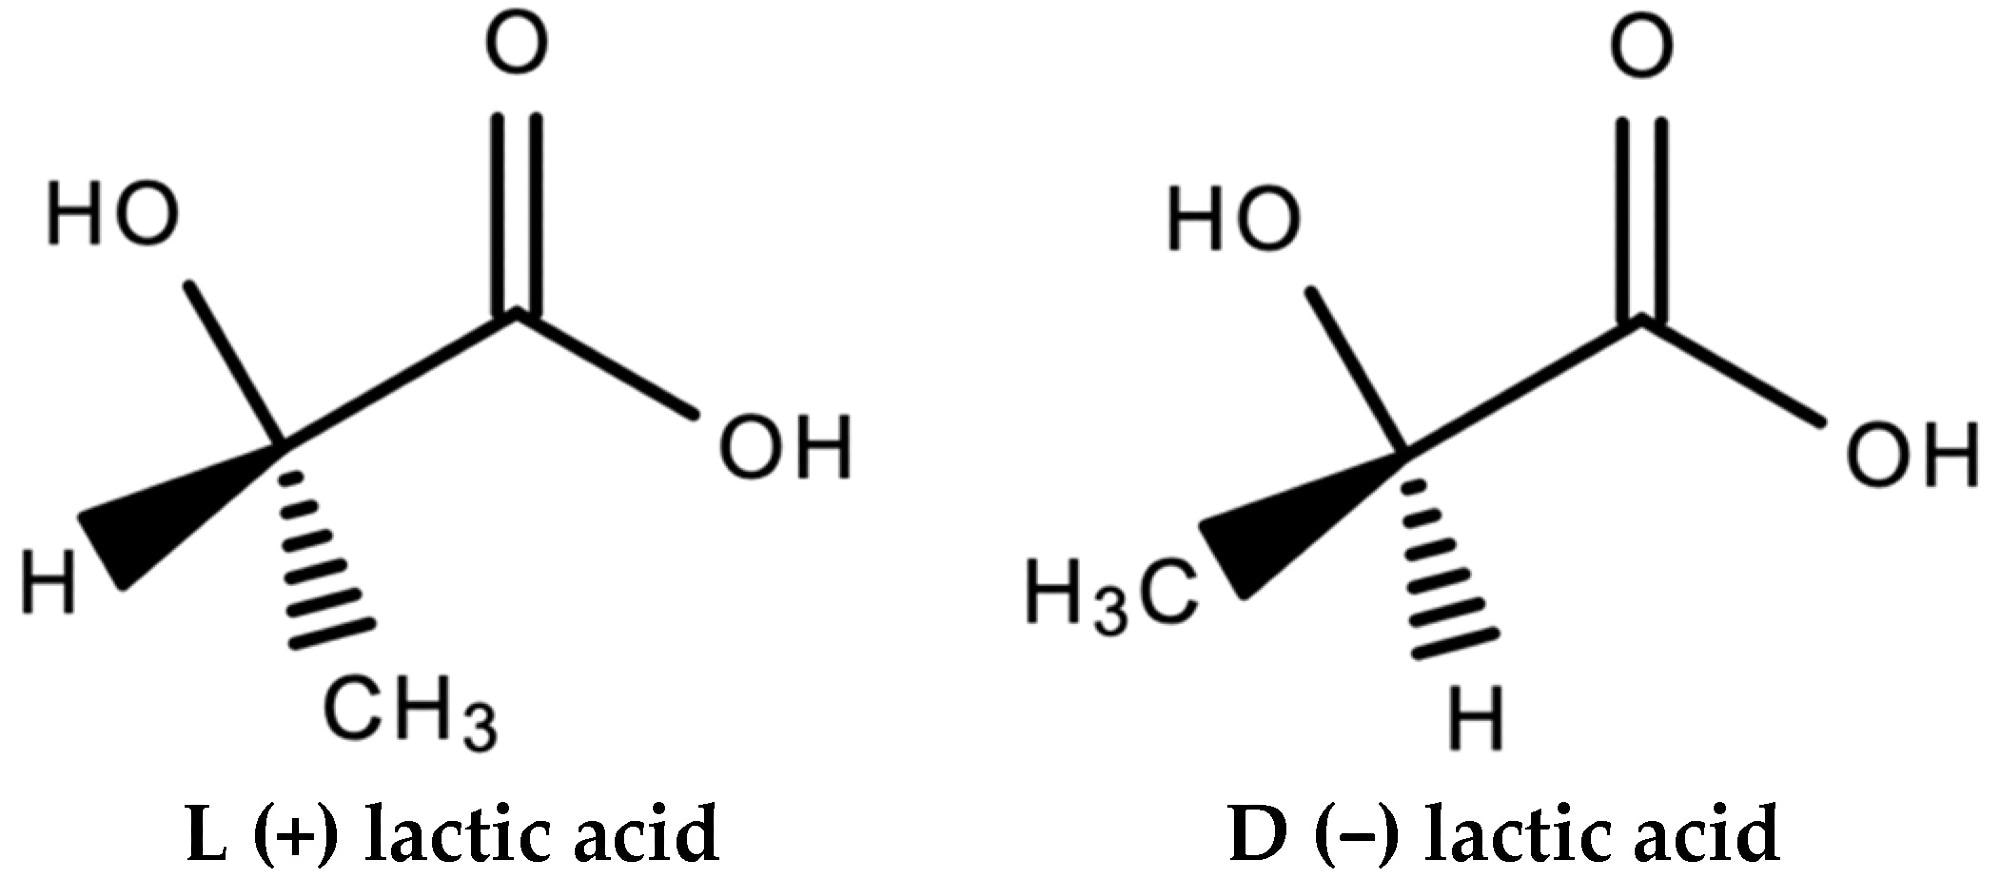 Stereoisomers of lactic acid.